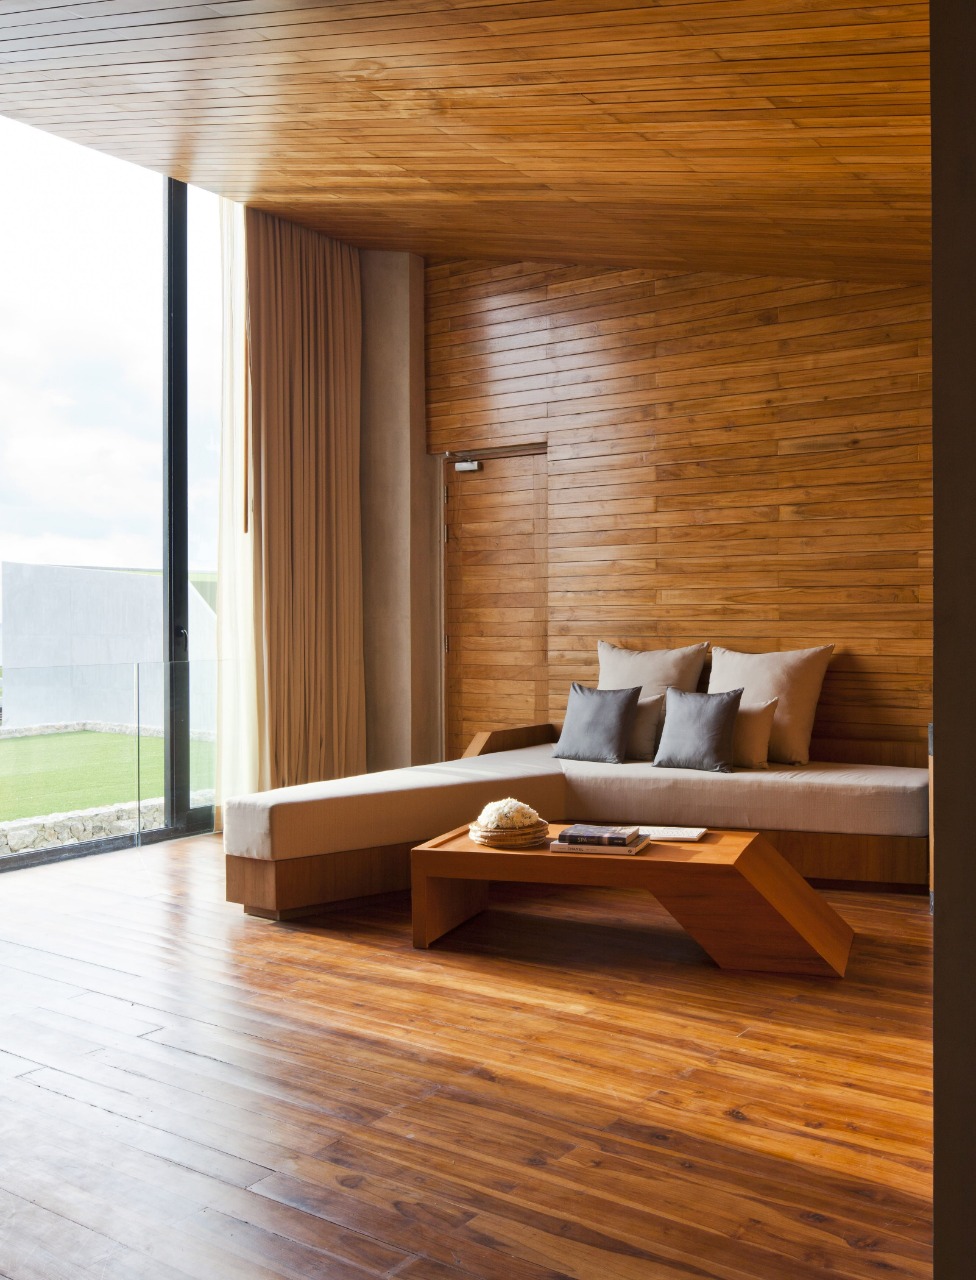 The interior of the room has a strong touch of wood on the floor to the ceiling